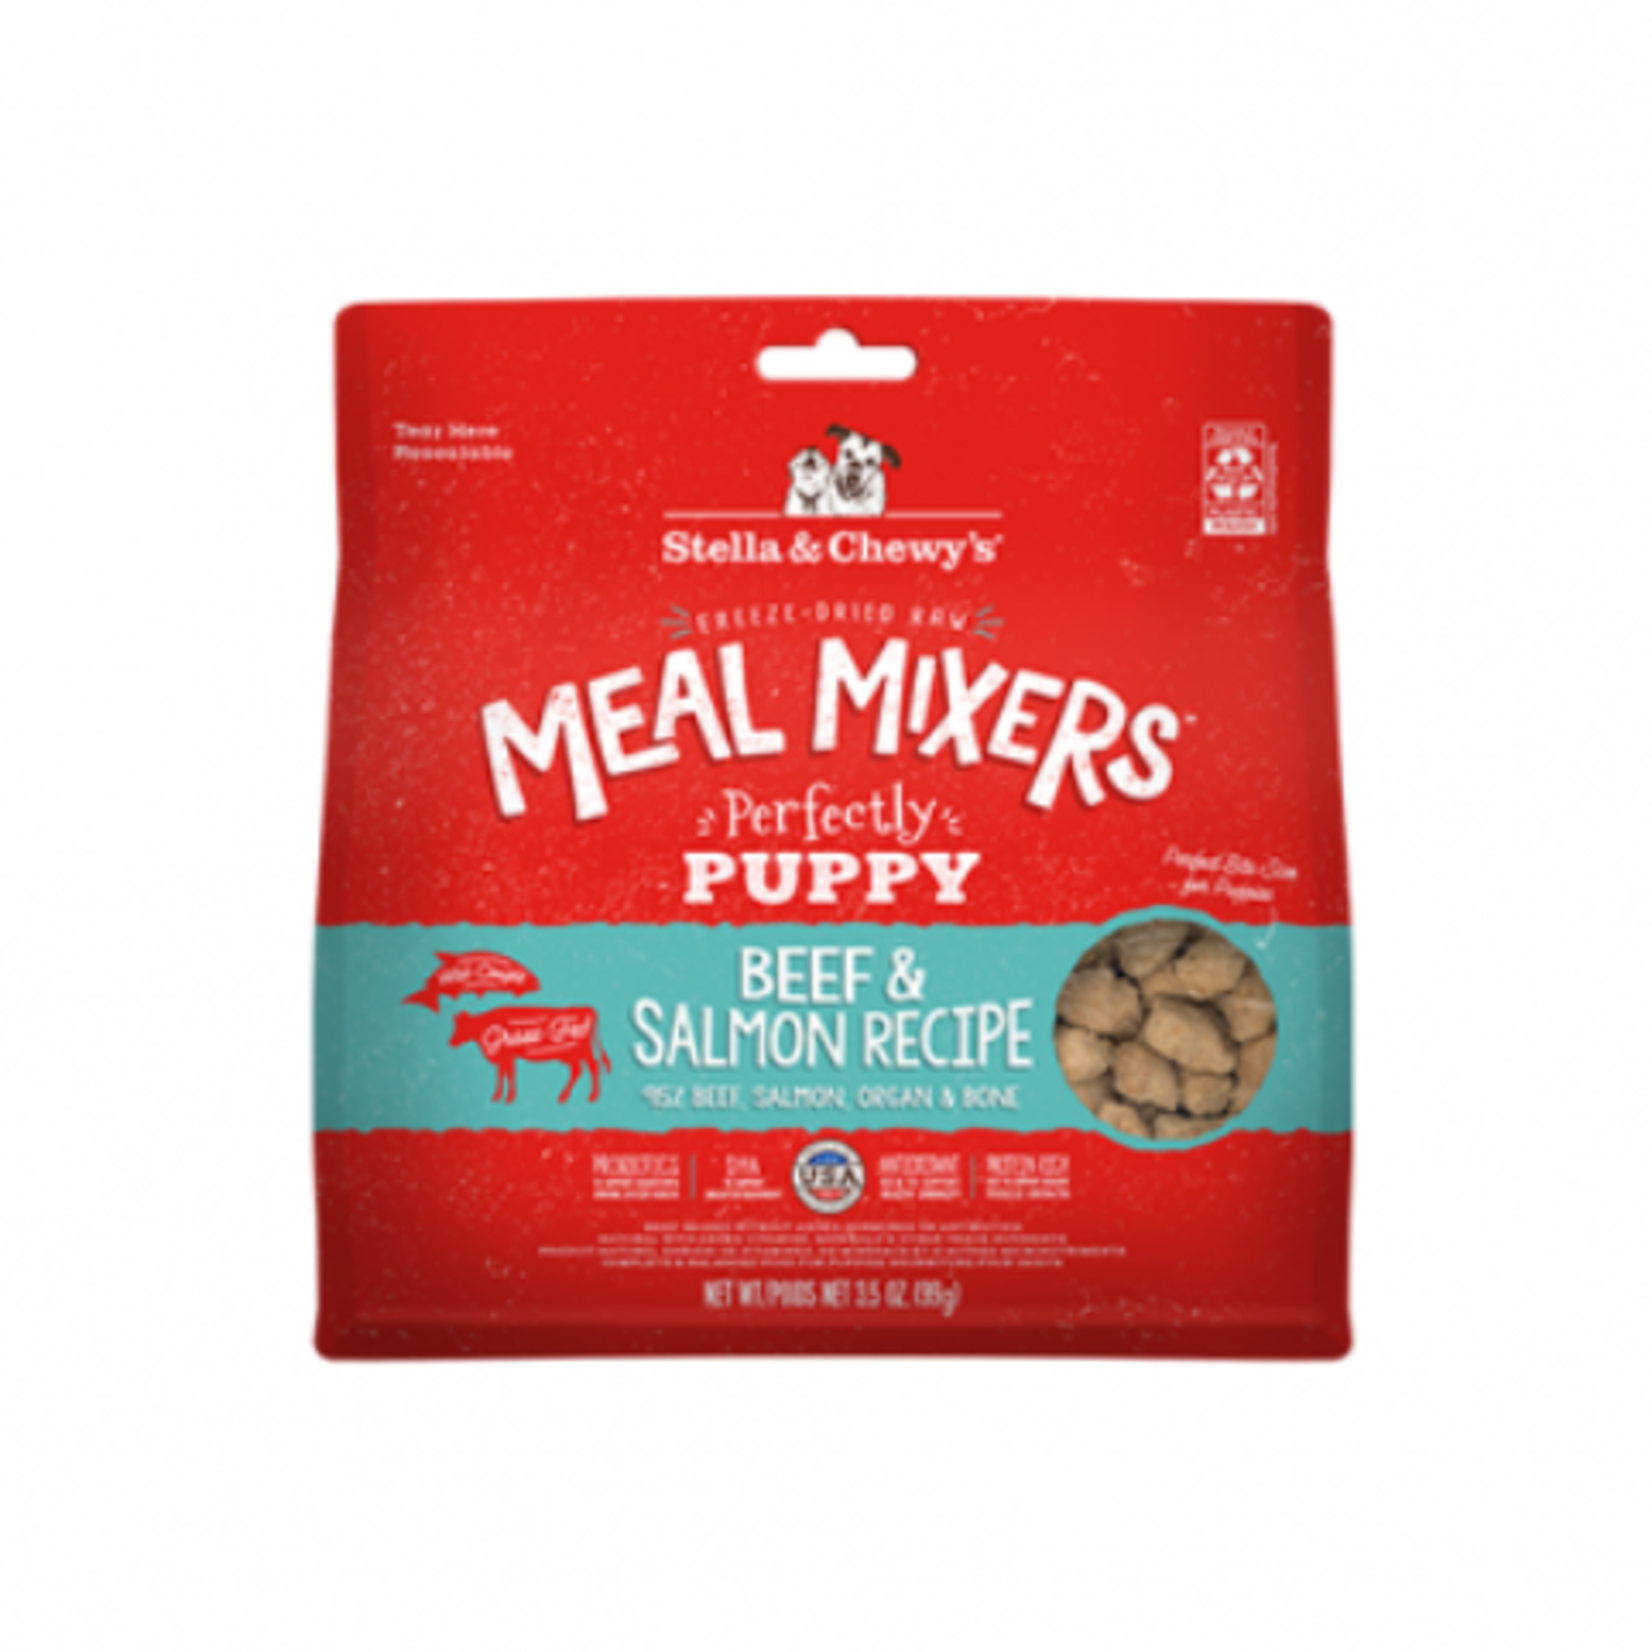 Stella & Chewy s Perfectly Puppy - Beef & Salmon - Meal Mixers - Freeze Dried - dogs - 3.5 oz